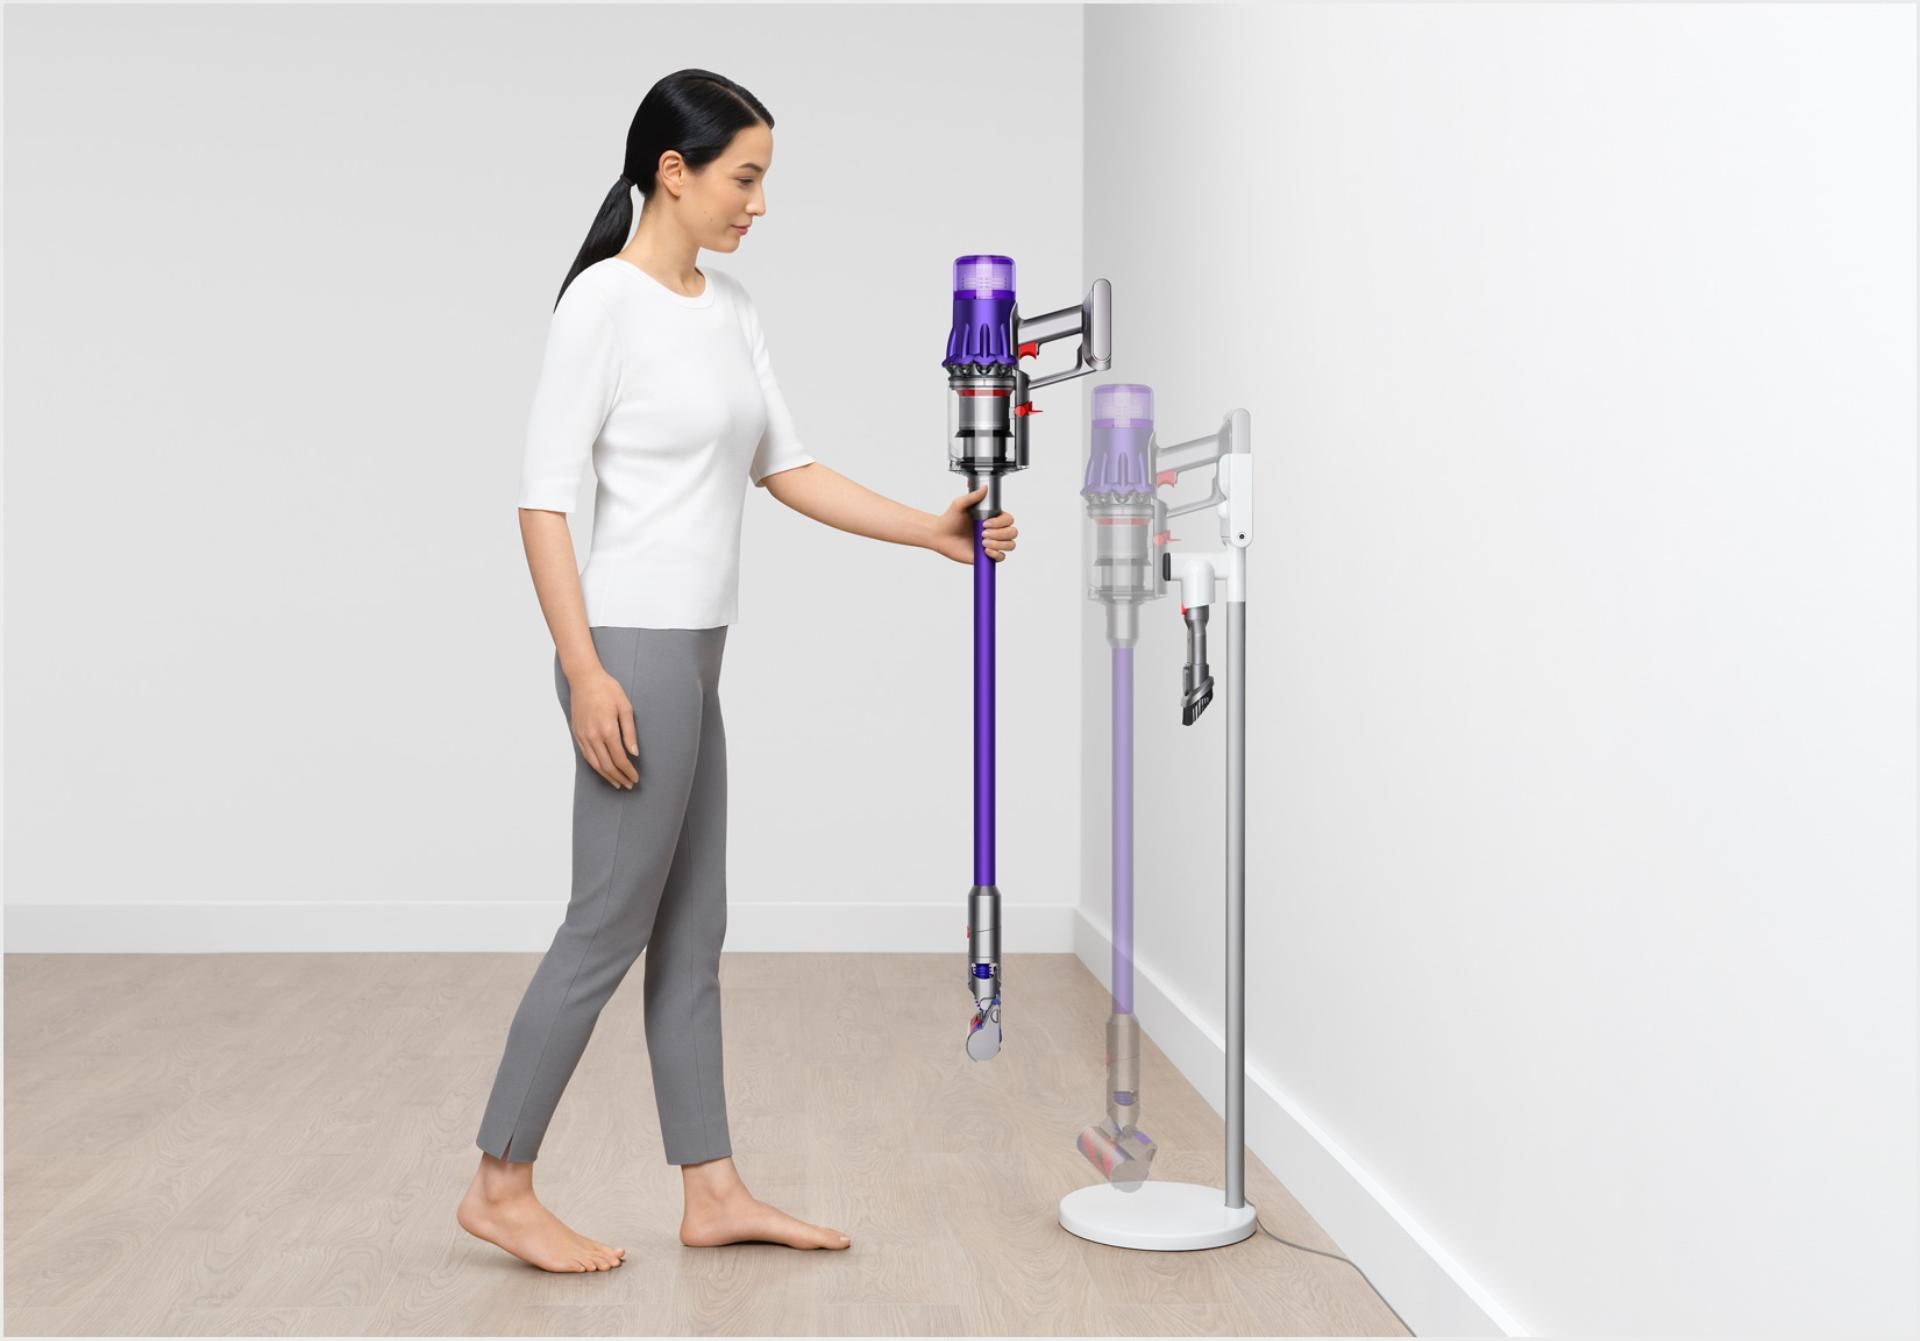 Dyson Digital Slim™ vacuum being placed into Grab and Go Floor dock.